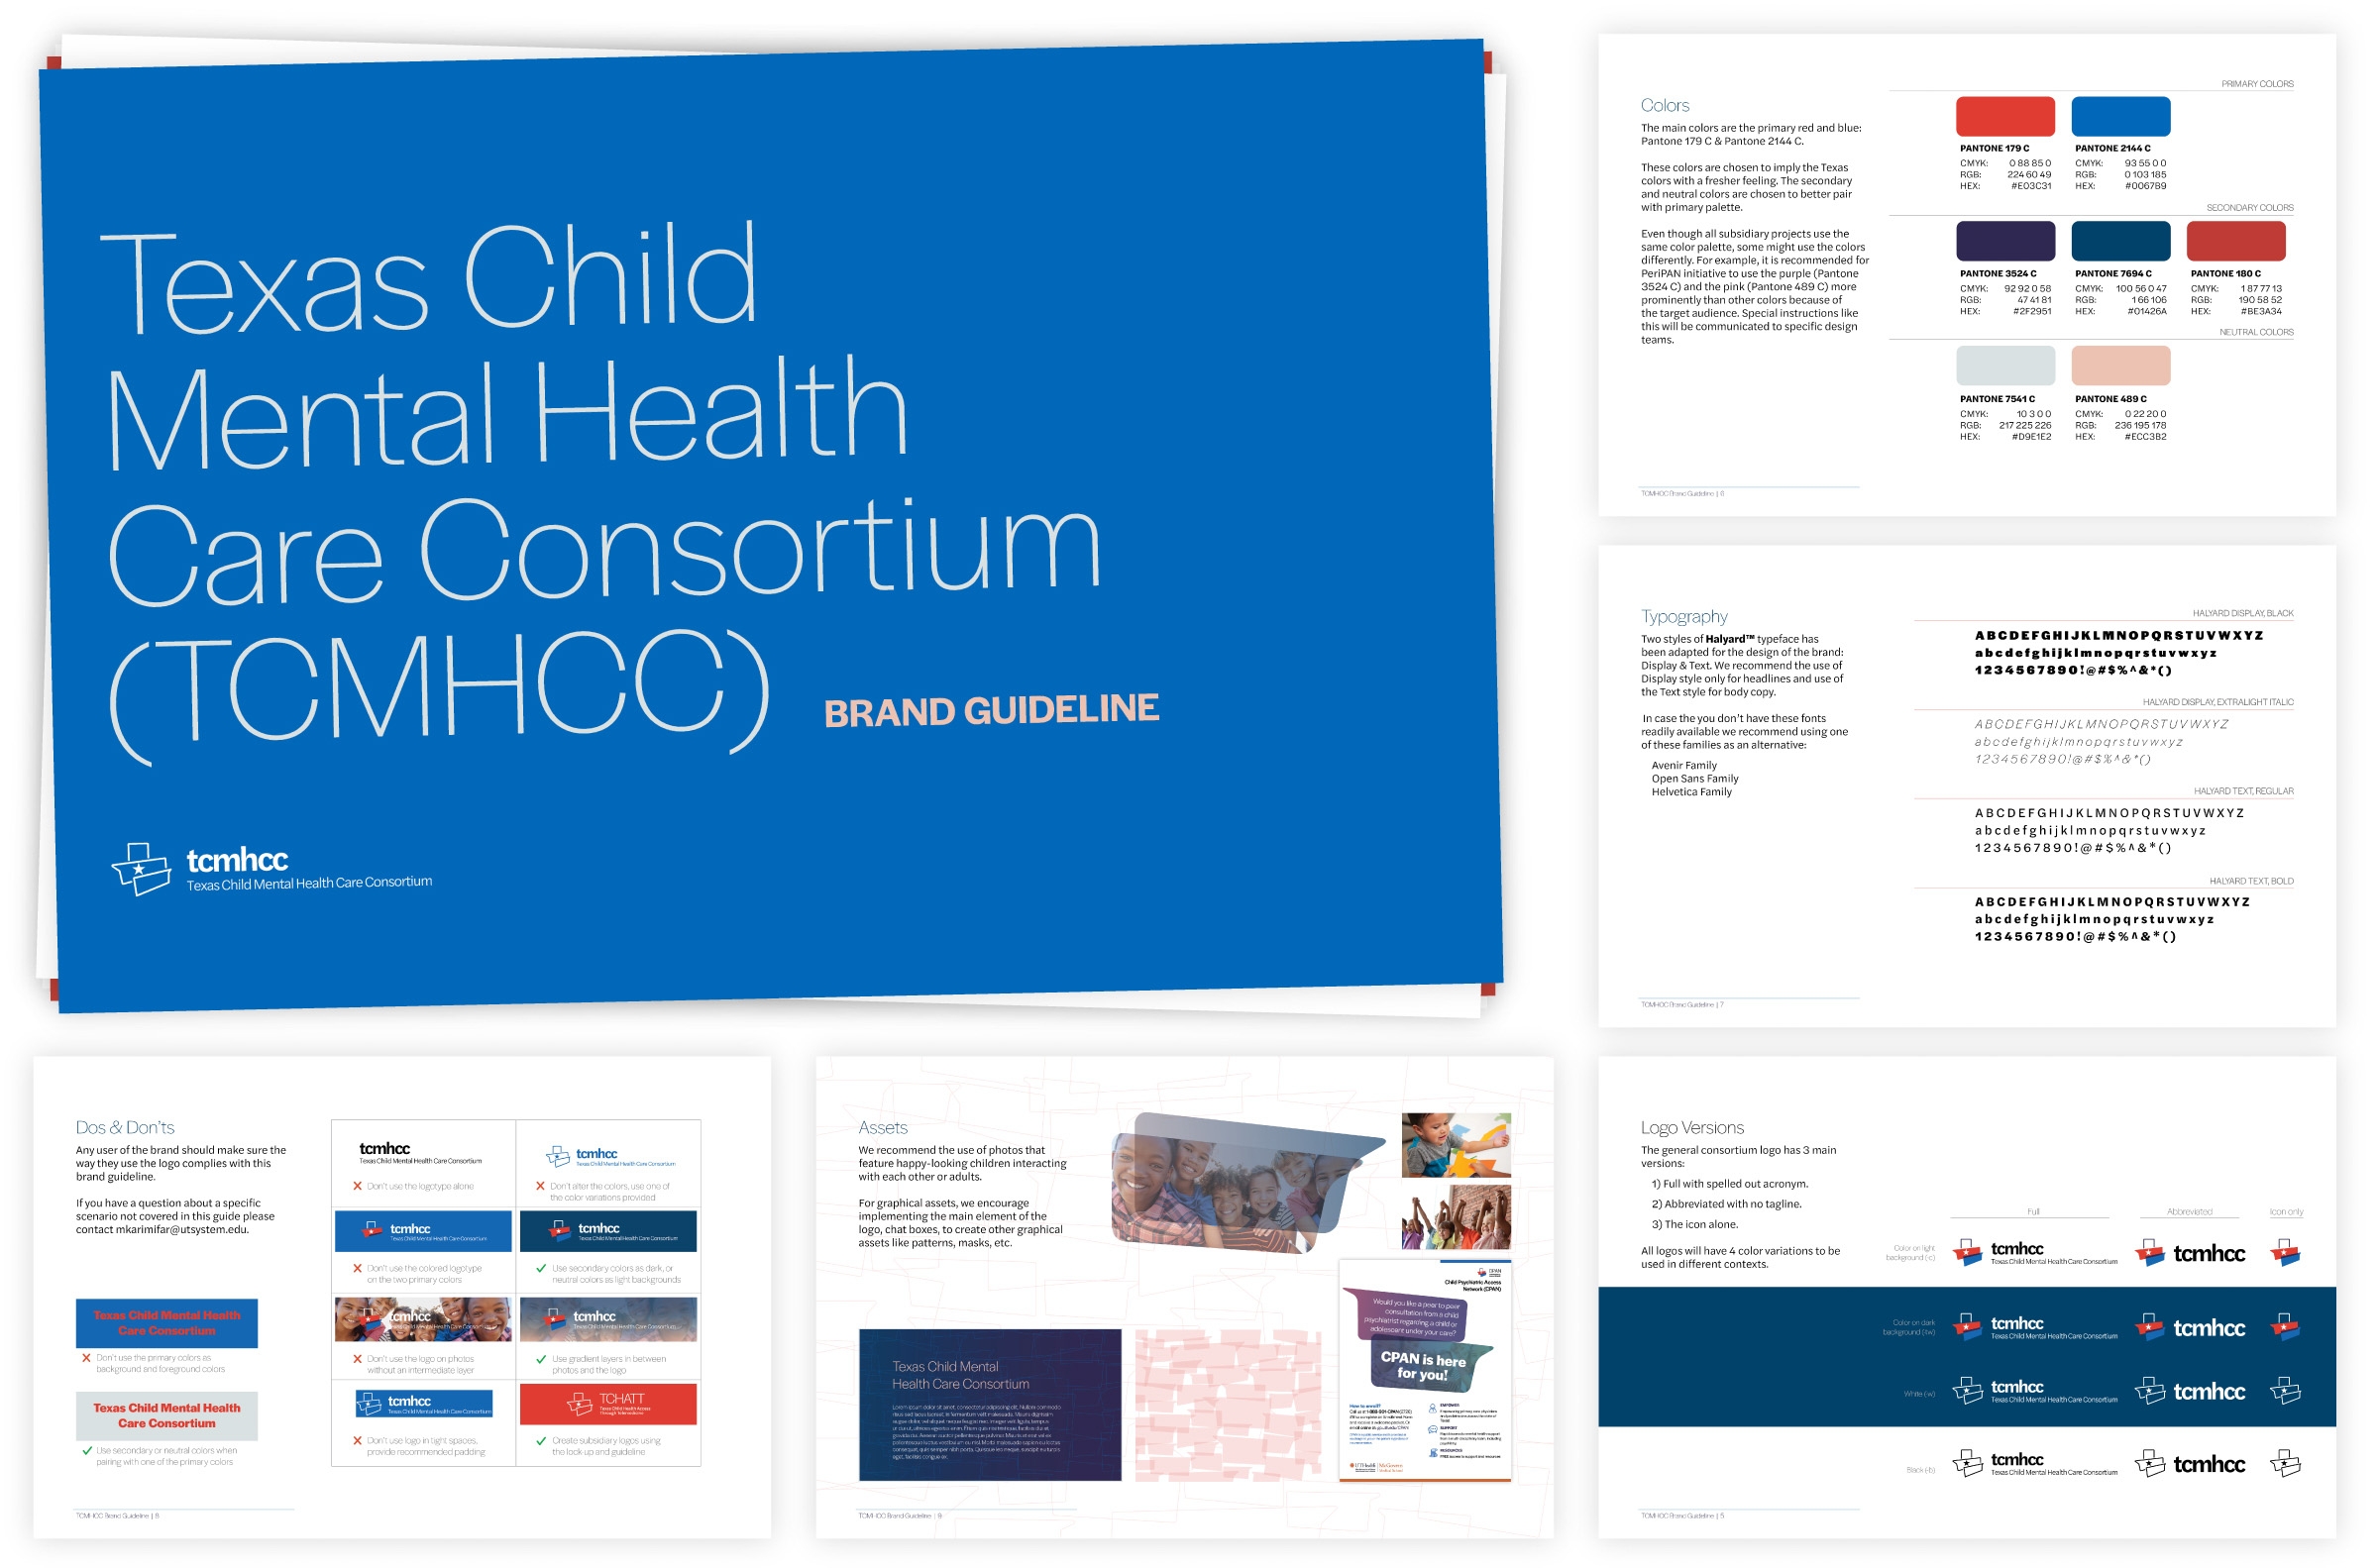 Some pages from the brand guideline book developed for the Texas Child Mental Health Care Consortium.